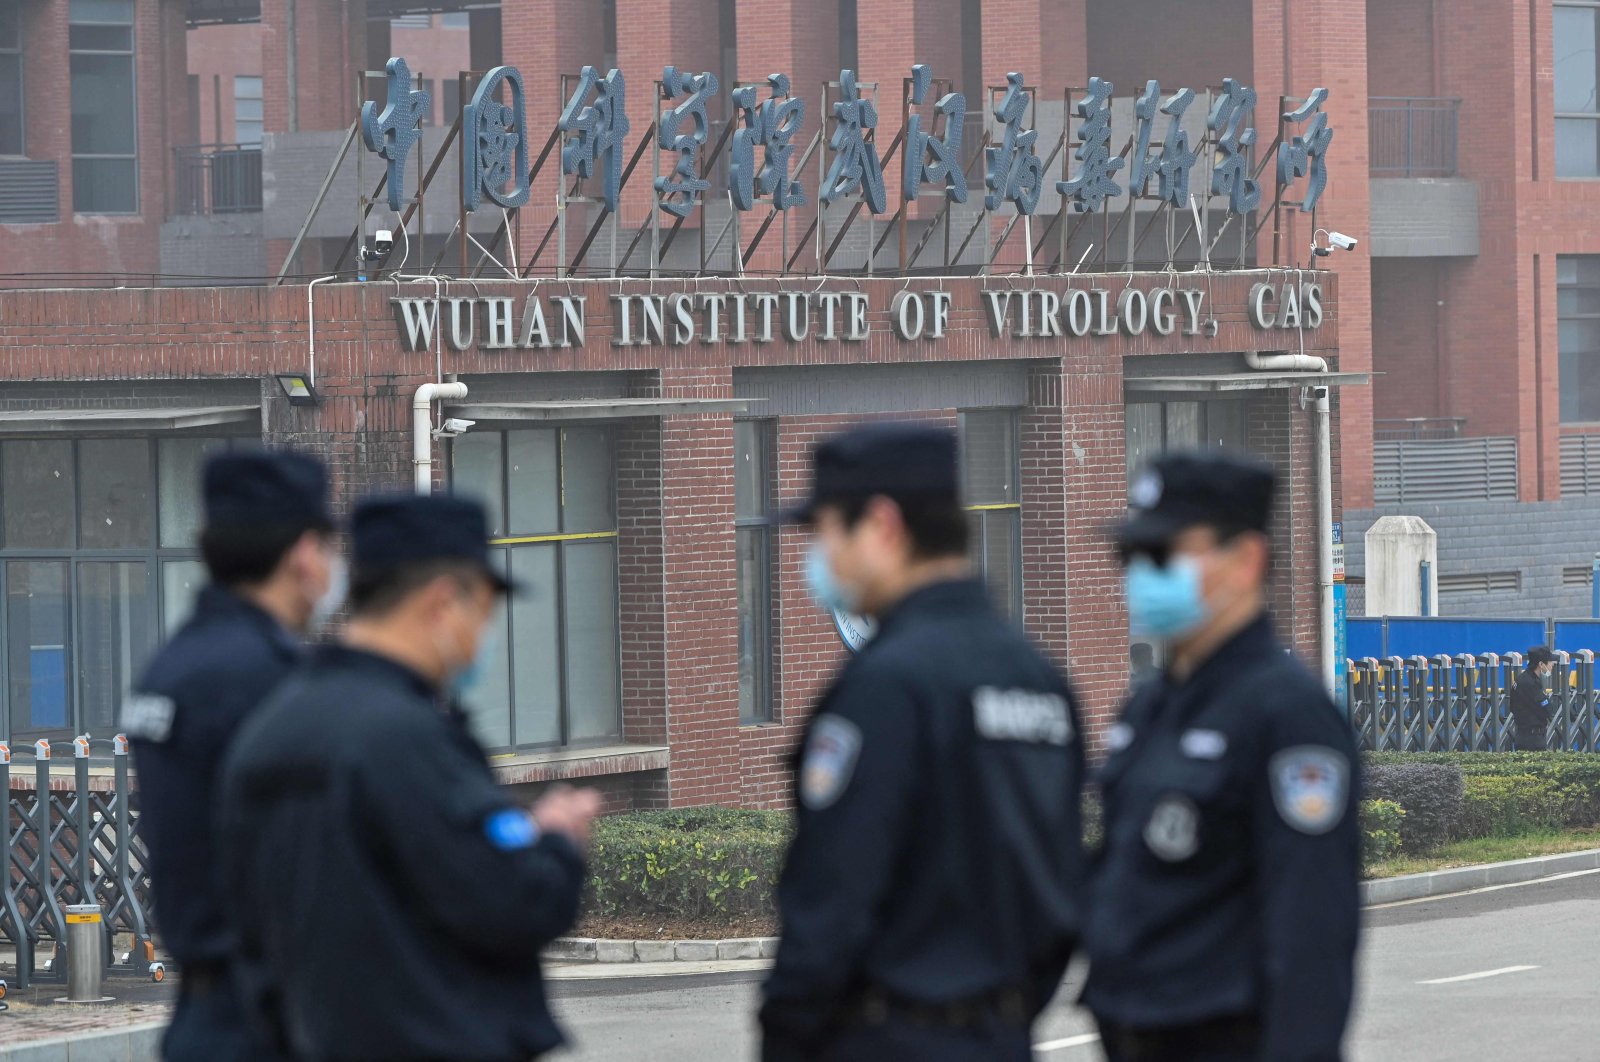 Security personnel stand guard outside the Wuhan Institute of Virology in Wuhan, China, Feb. 3, 2021. (AFP Photo)